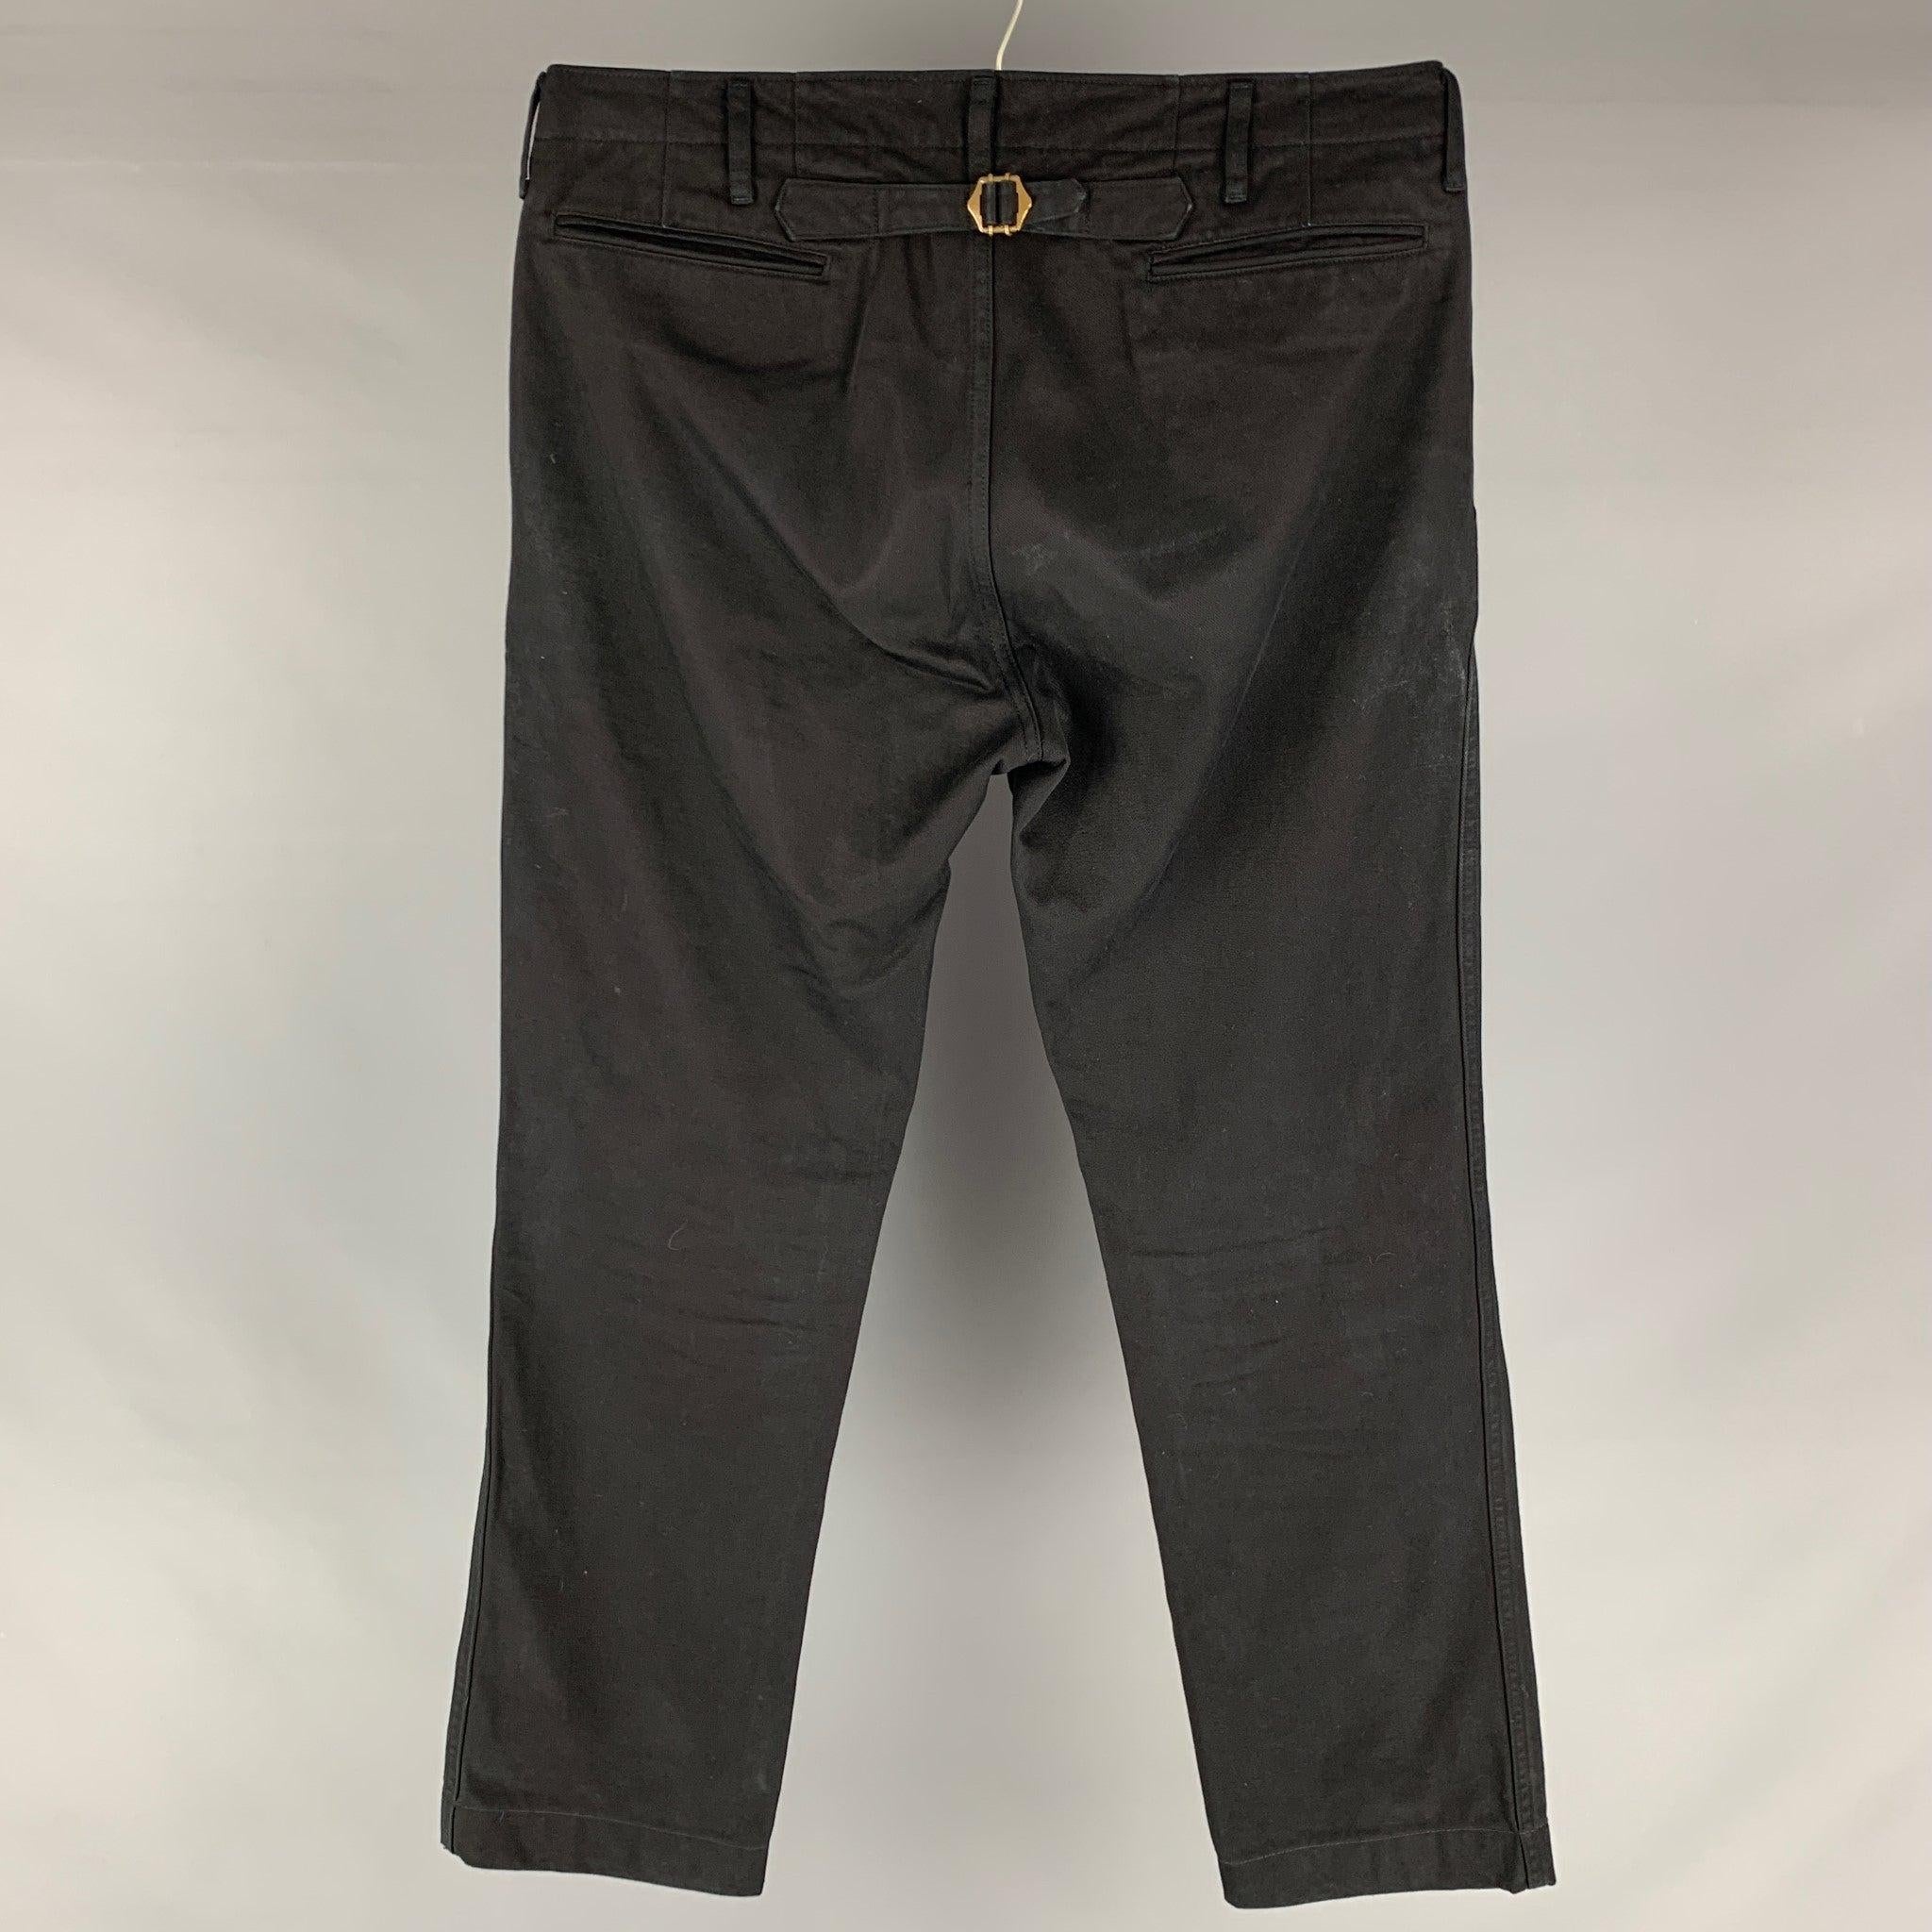 VISVIM Slim Chino casual pants come in black cotton featuring a side pocket, adjustable fit, and straight cut..Very Good Pre-Owned Condition 

Marked:   4 

Measurements: 
  Waist: 36 inches Rise: 11 inches Inseam: 30 inches  
 

  
  
 
Reference: